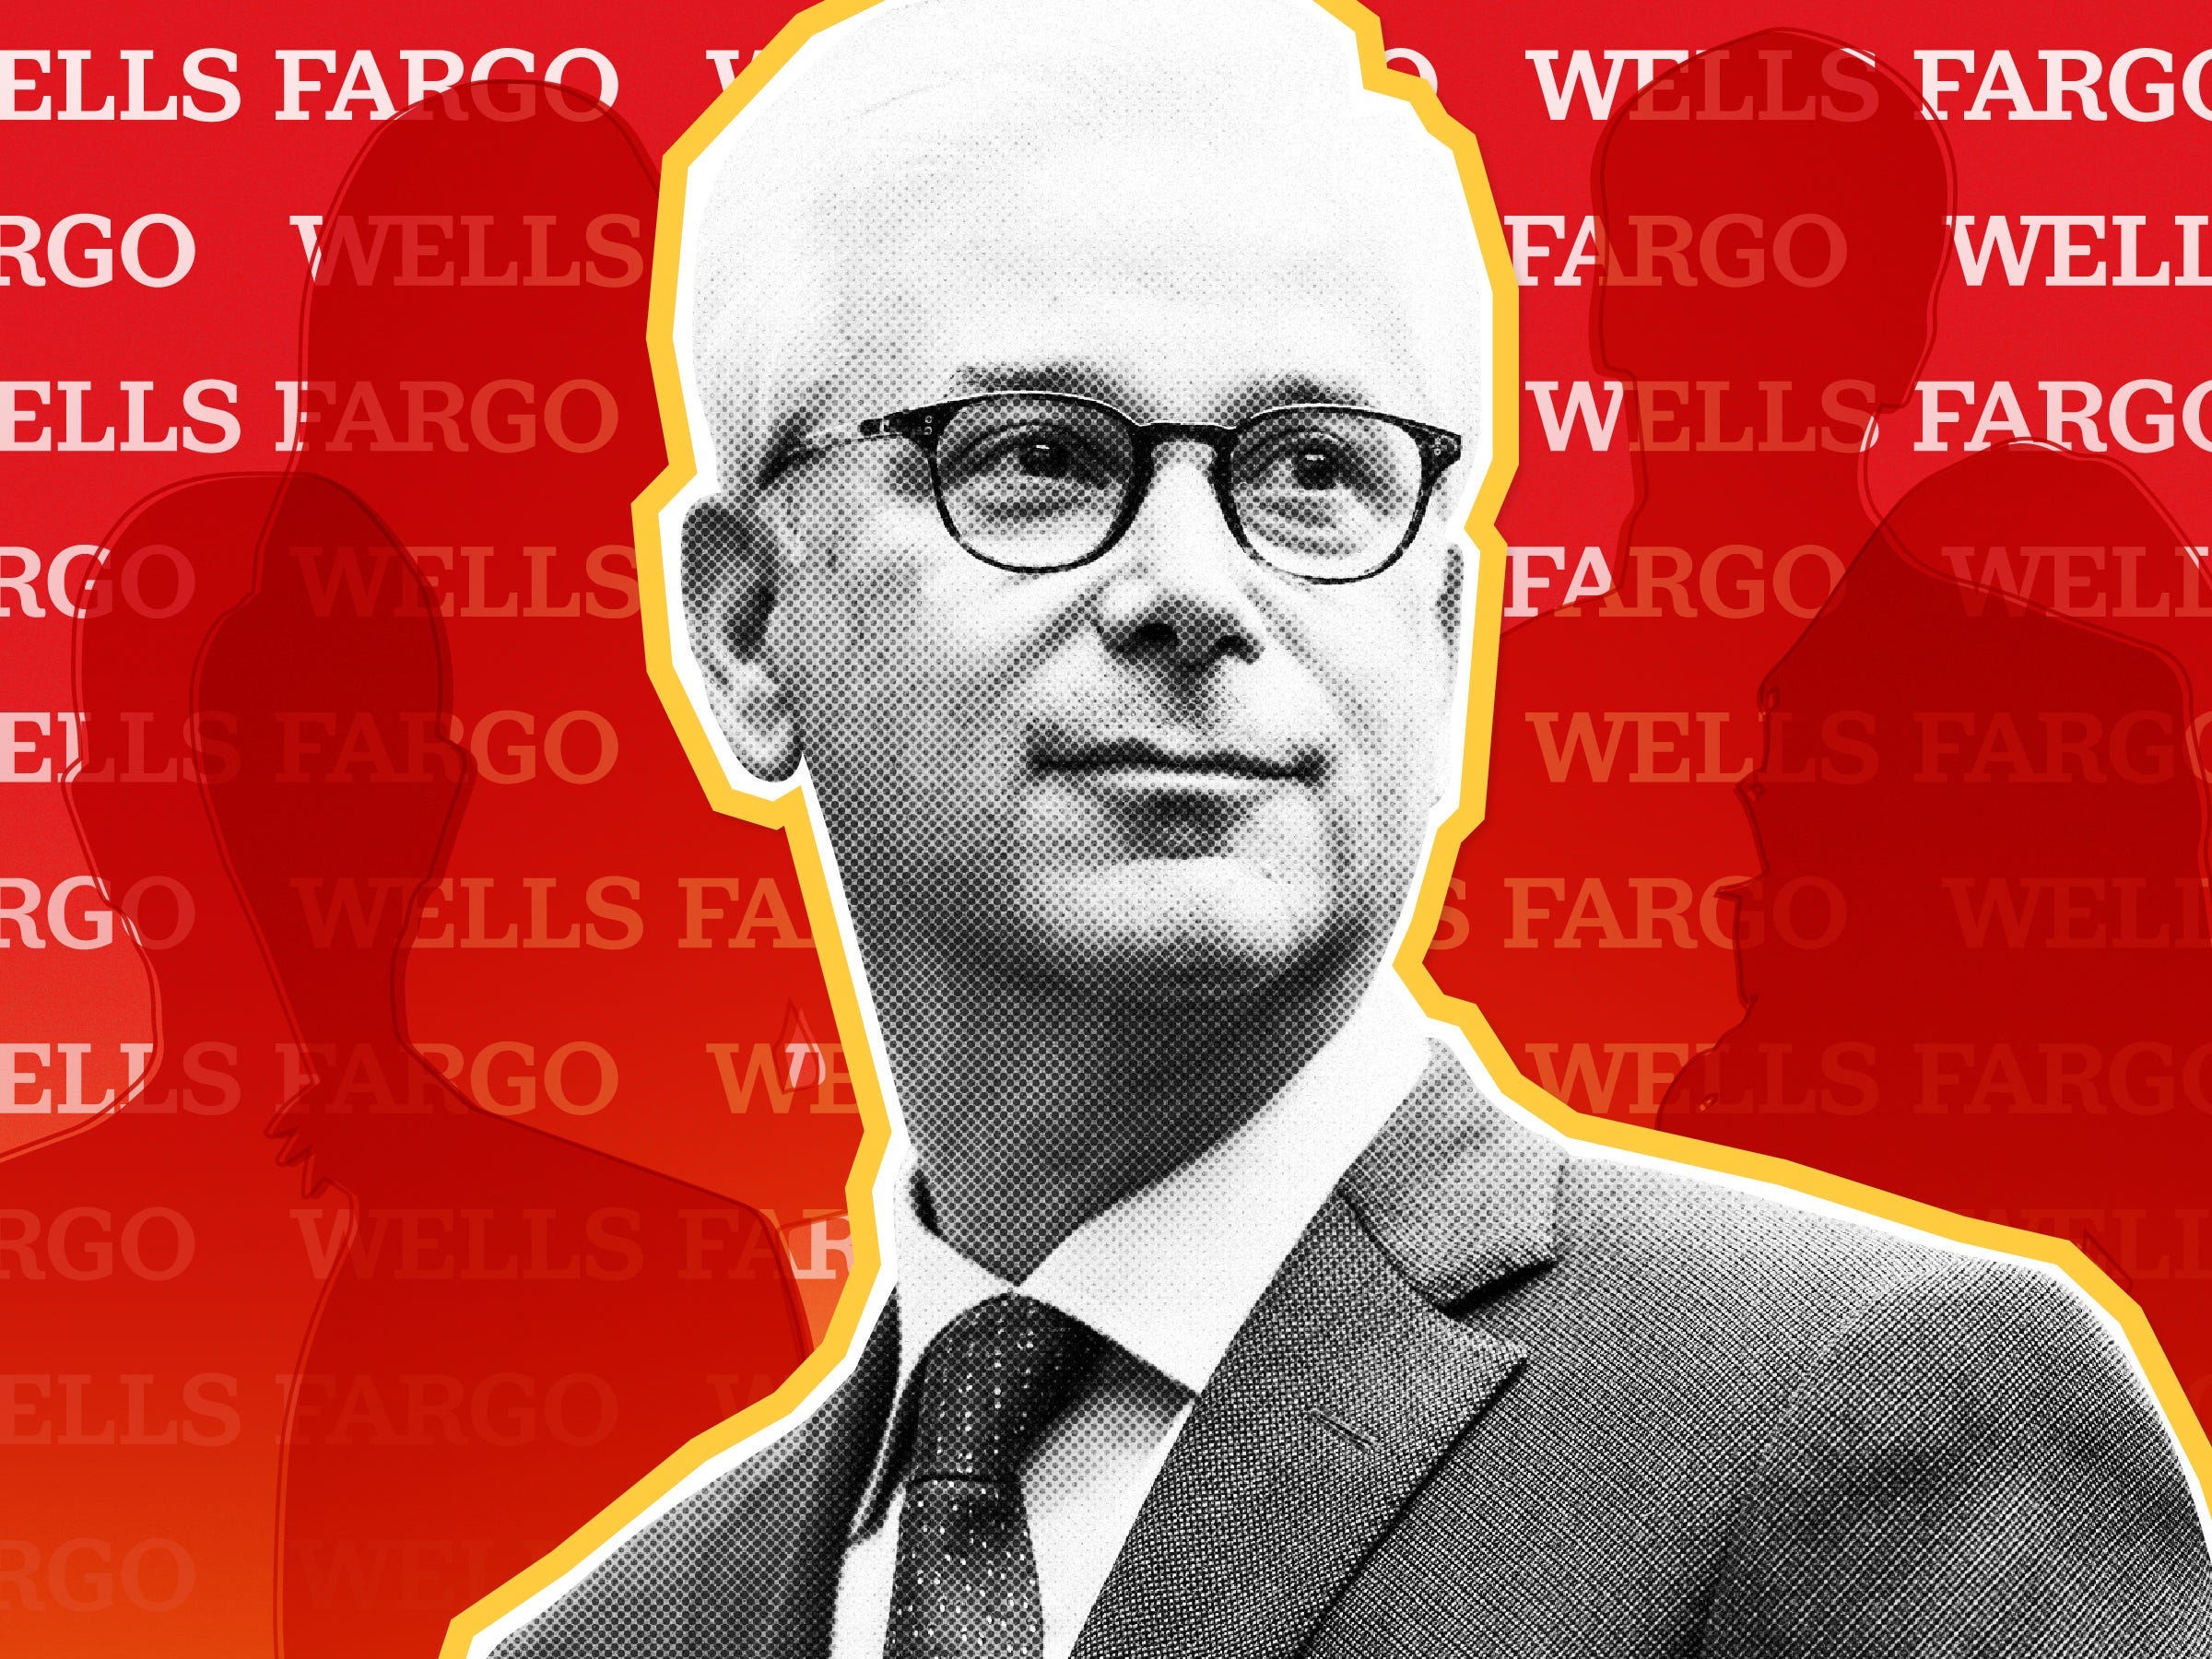 Wells Fargo CEO Charlie Scharf with anonymous silhouettes behind him on pattern of Wells Fargo logos on a red background.